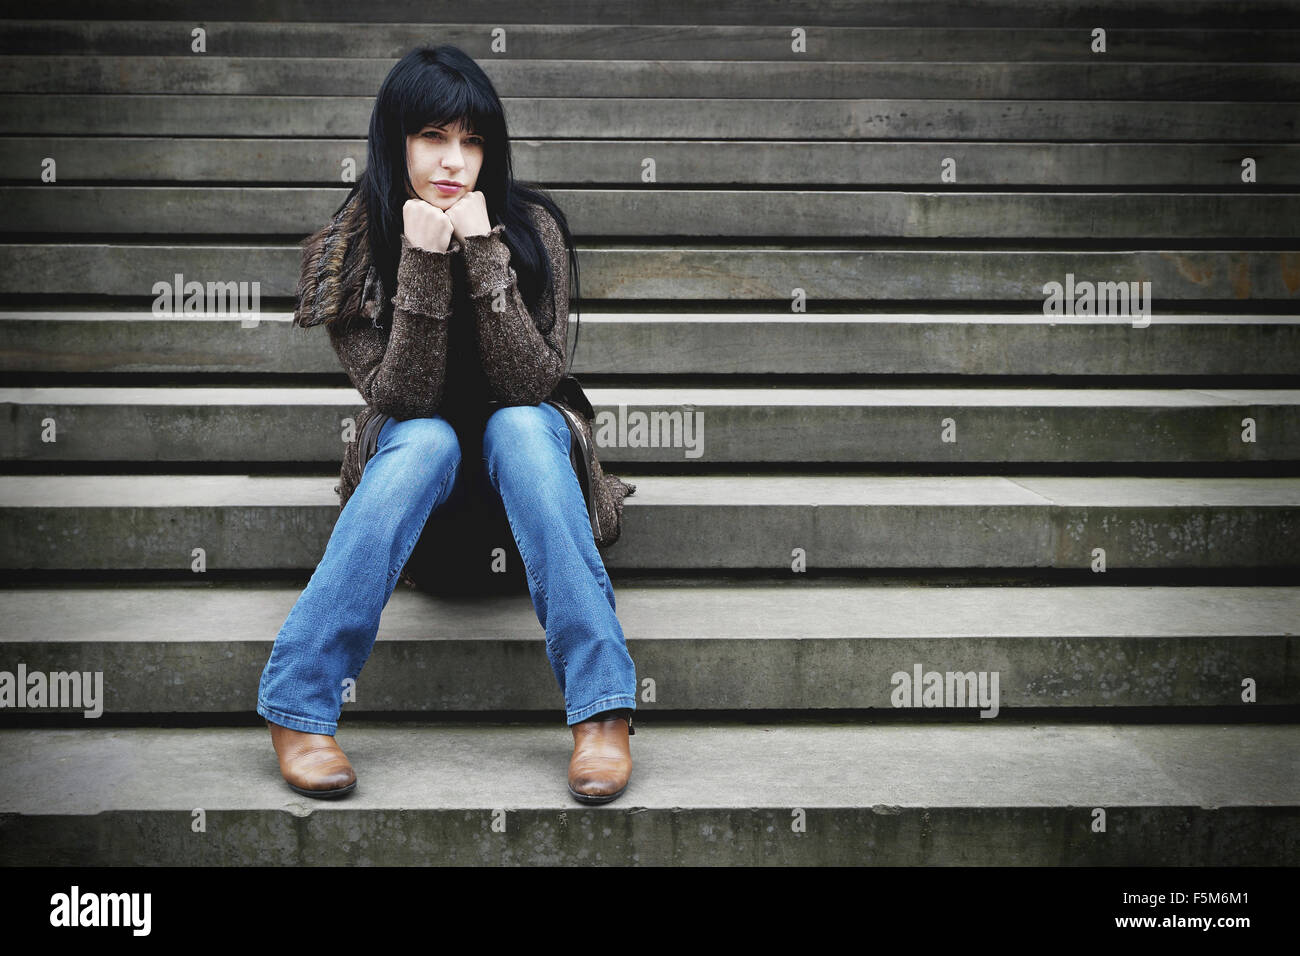 Lonely Woman sitting on steps Banque D'Images